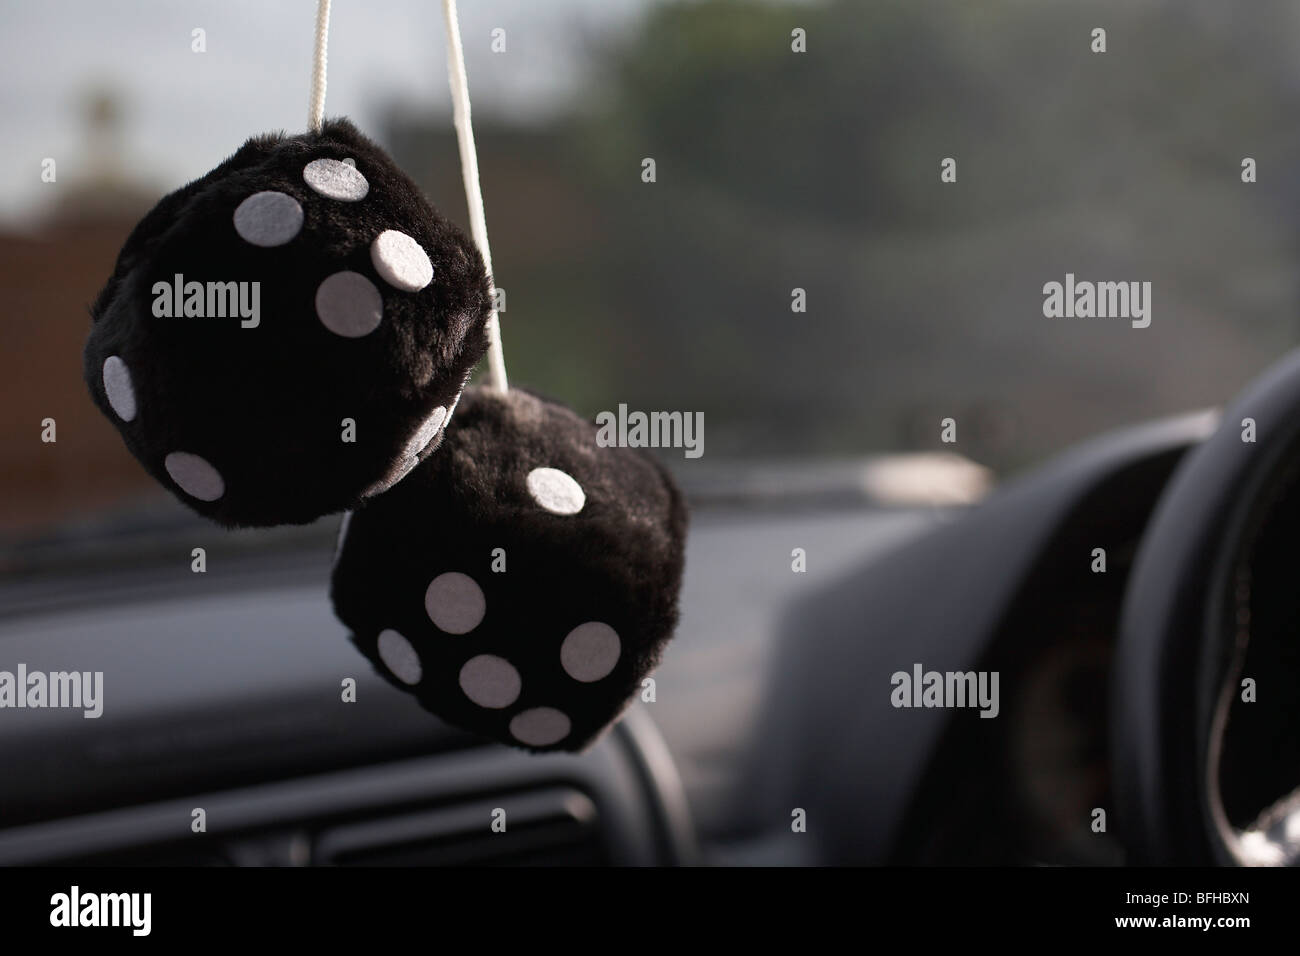 89 Fuzzy Dice In Car Stock Photos, High-Res Pictures, and Images